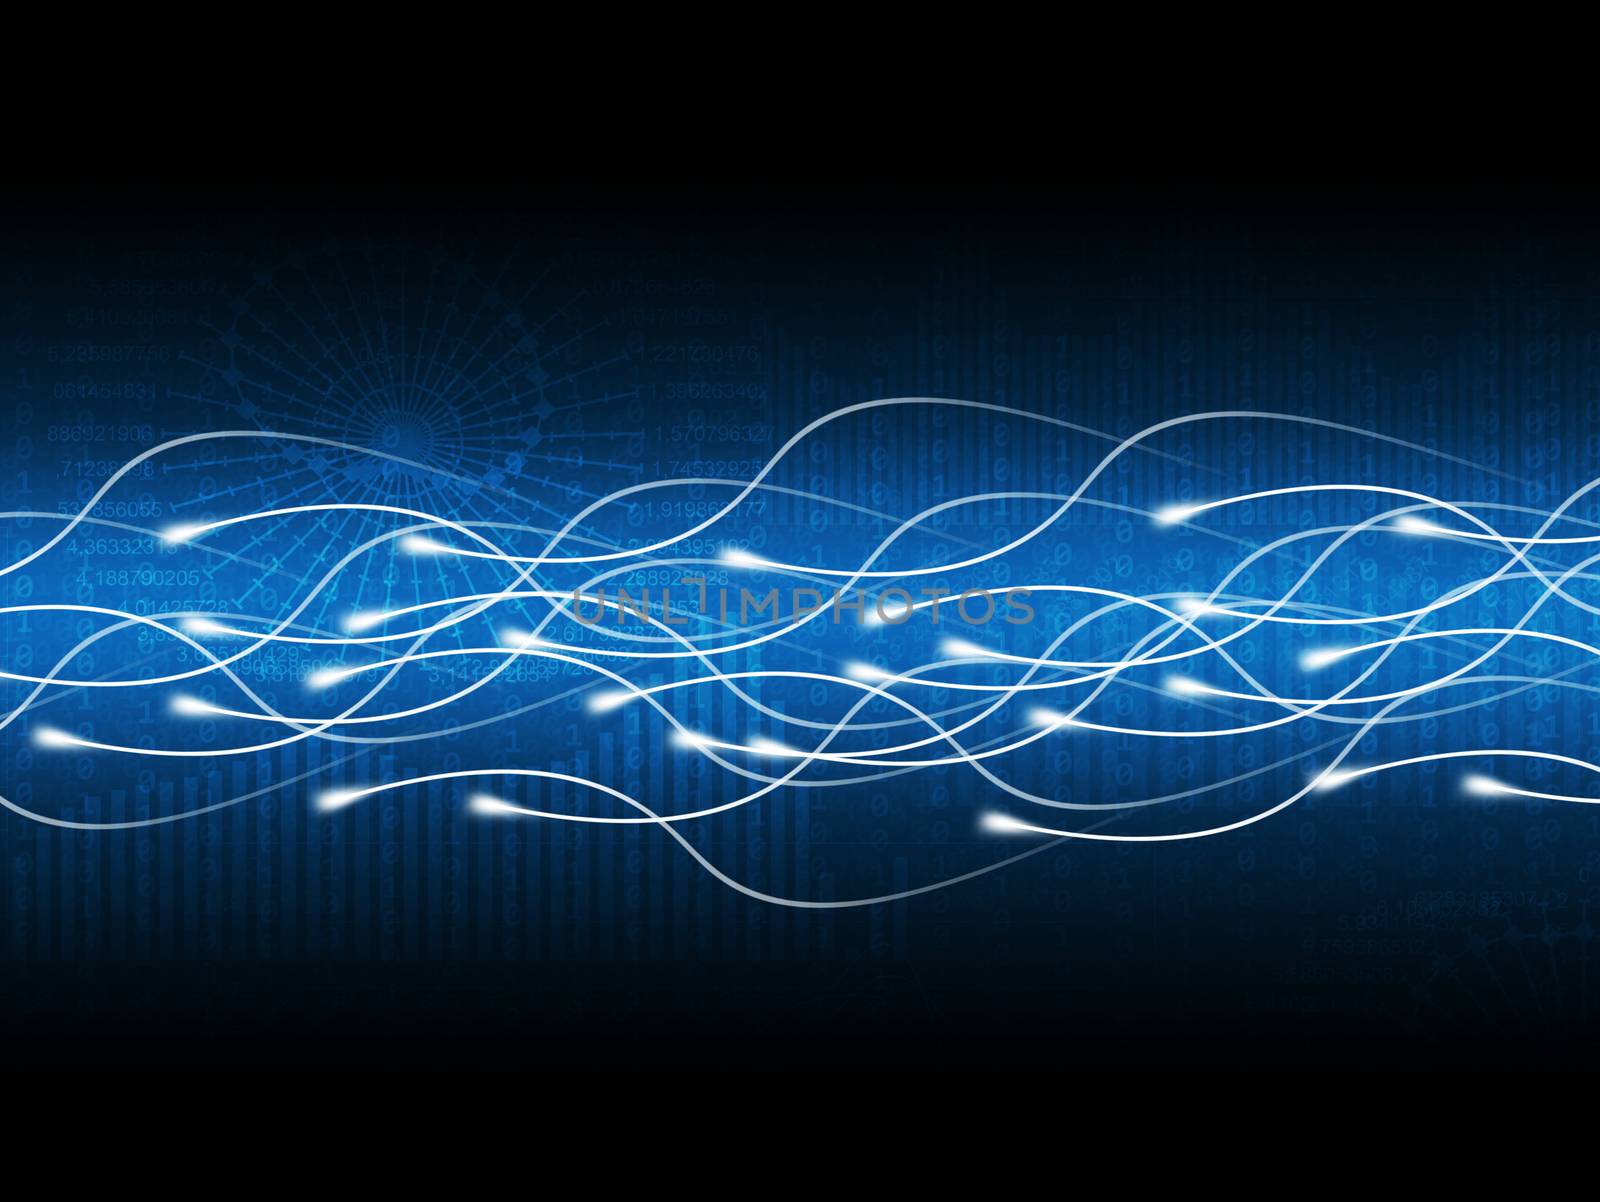 Abstract blue matrix background with waves and figures